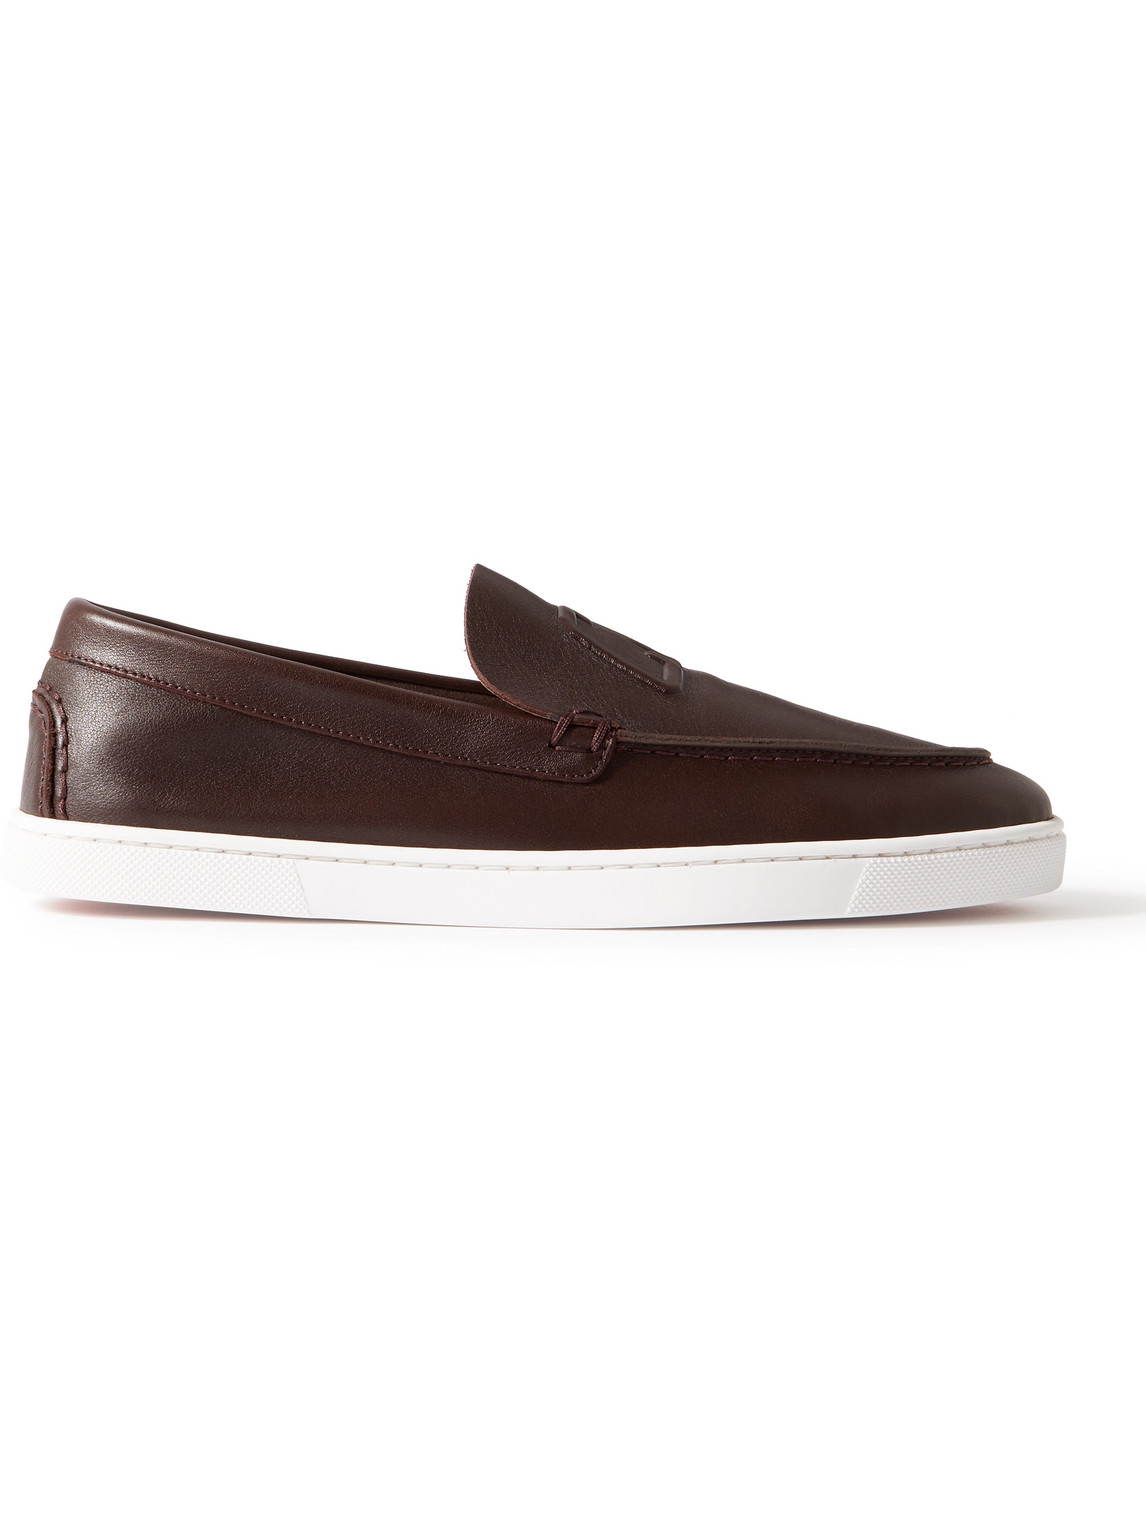 Christian Louboutin Varsiboat Logo-embossed Leather Loafers In Brown